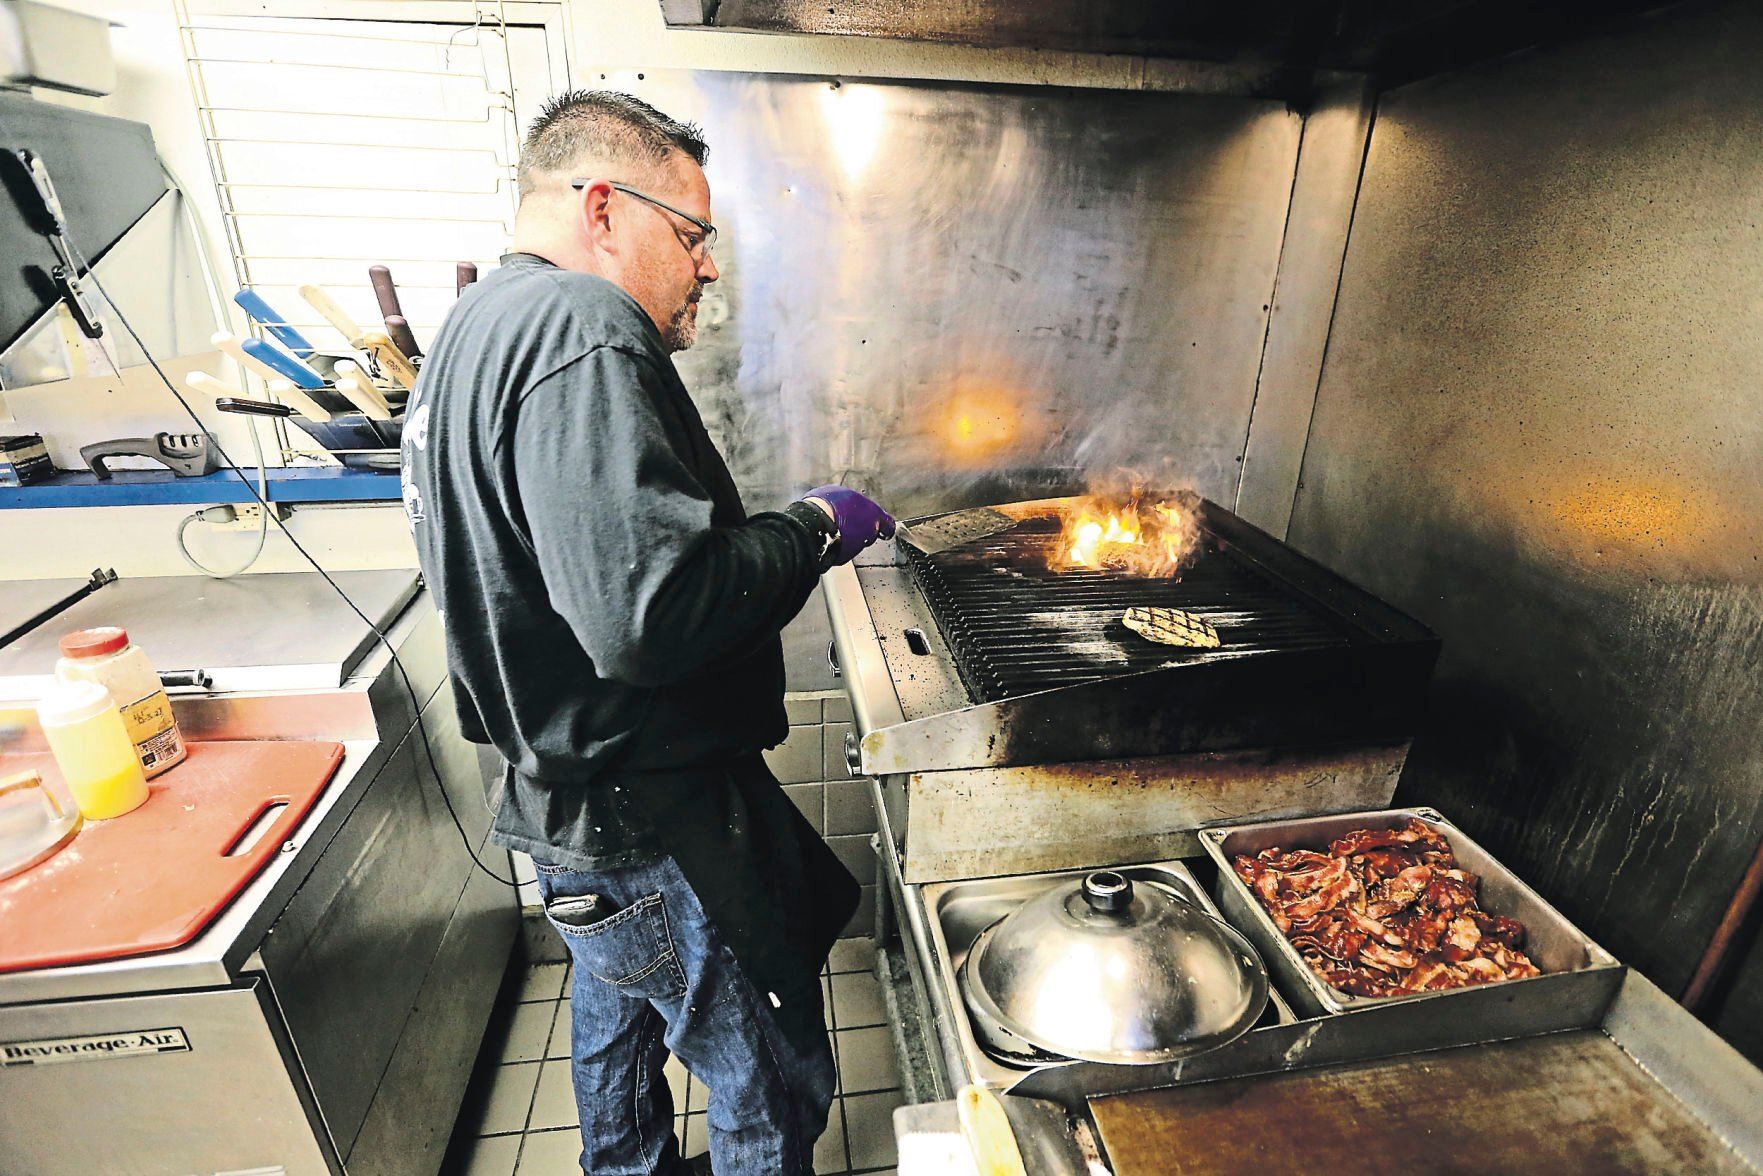 Chuck Bowers makes a chicken bacon ranch burger at Foodie Garage Eatery in Dubuque on Friday, April 23, 2021.    PHOTO CREDIT: JESSICA REILLY
Telegraph Herald